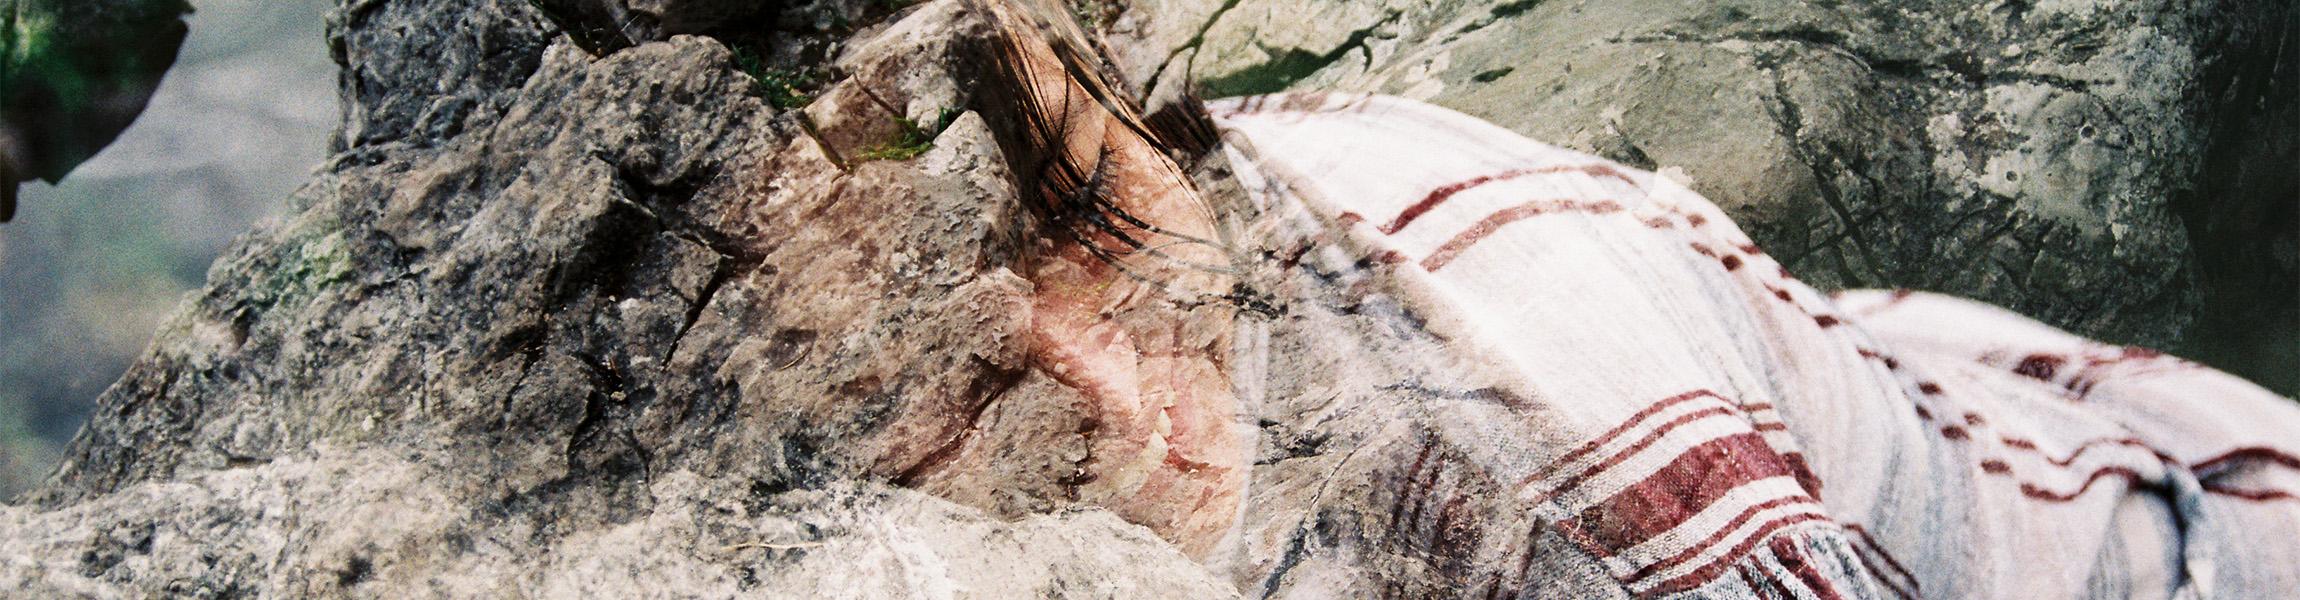 A double exposure smiling person wearing a plaid shirt who is blending into a bed of rocks.